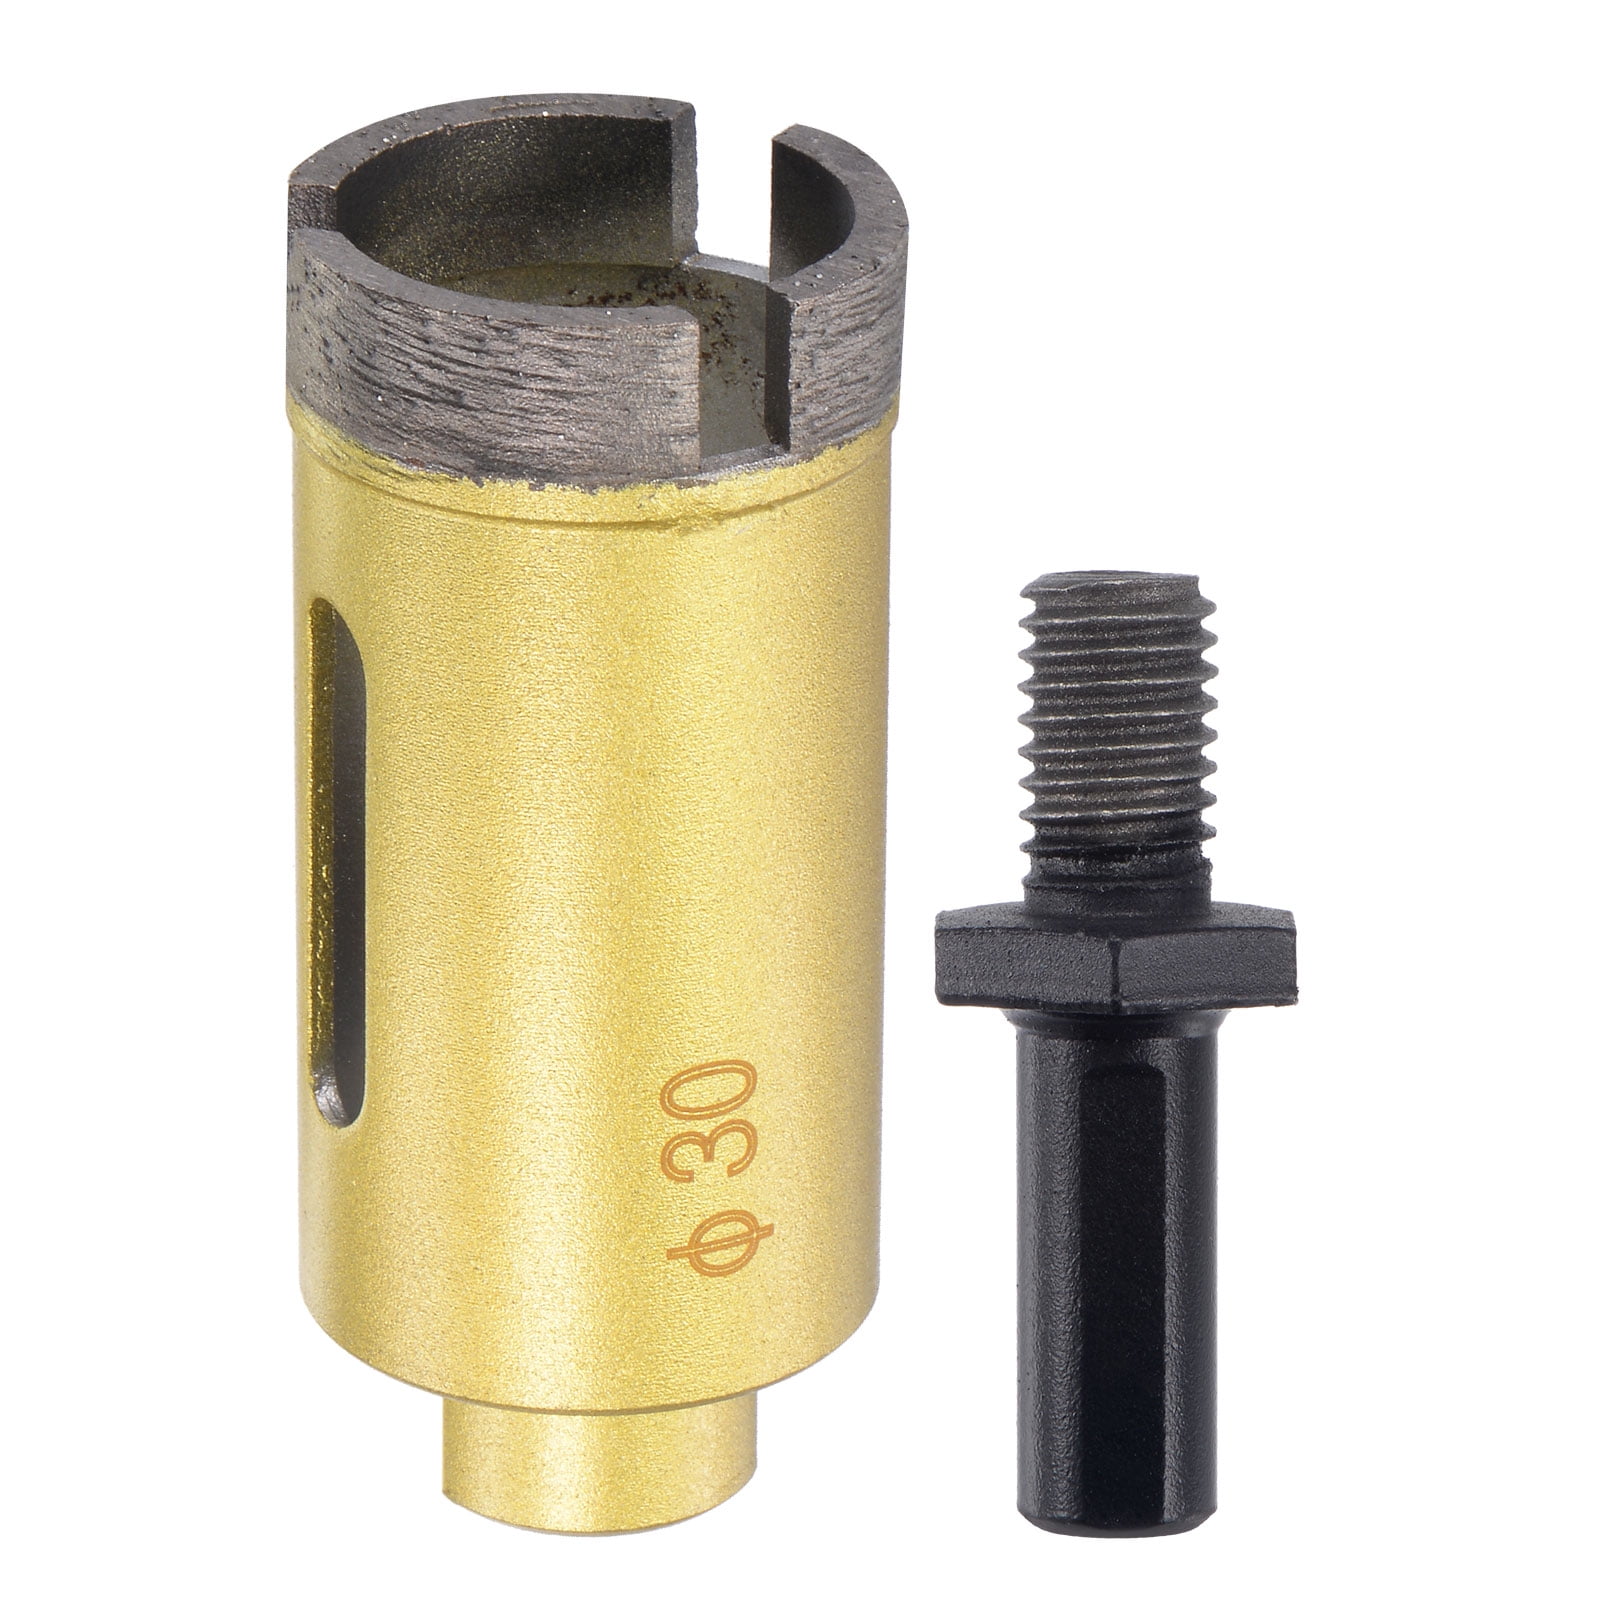 3'' Dry Diamond Core Drill bit with angle grinder adapter & center guide